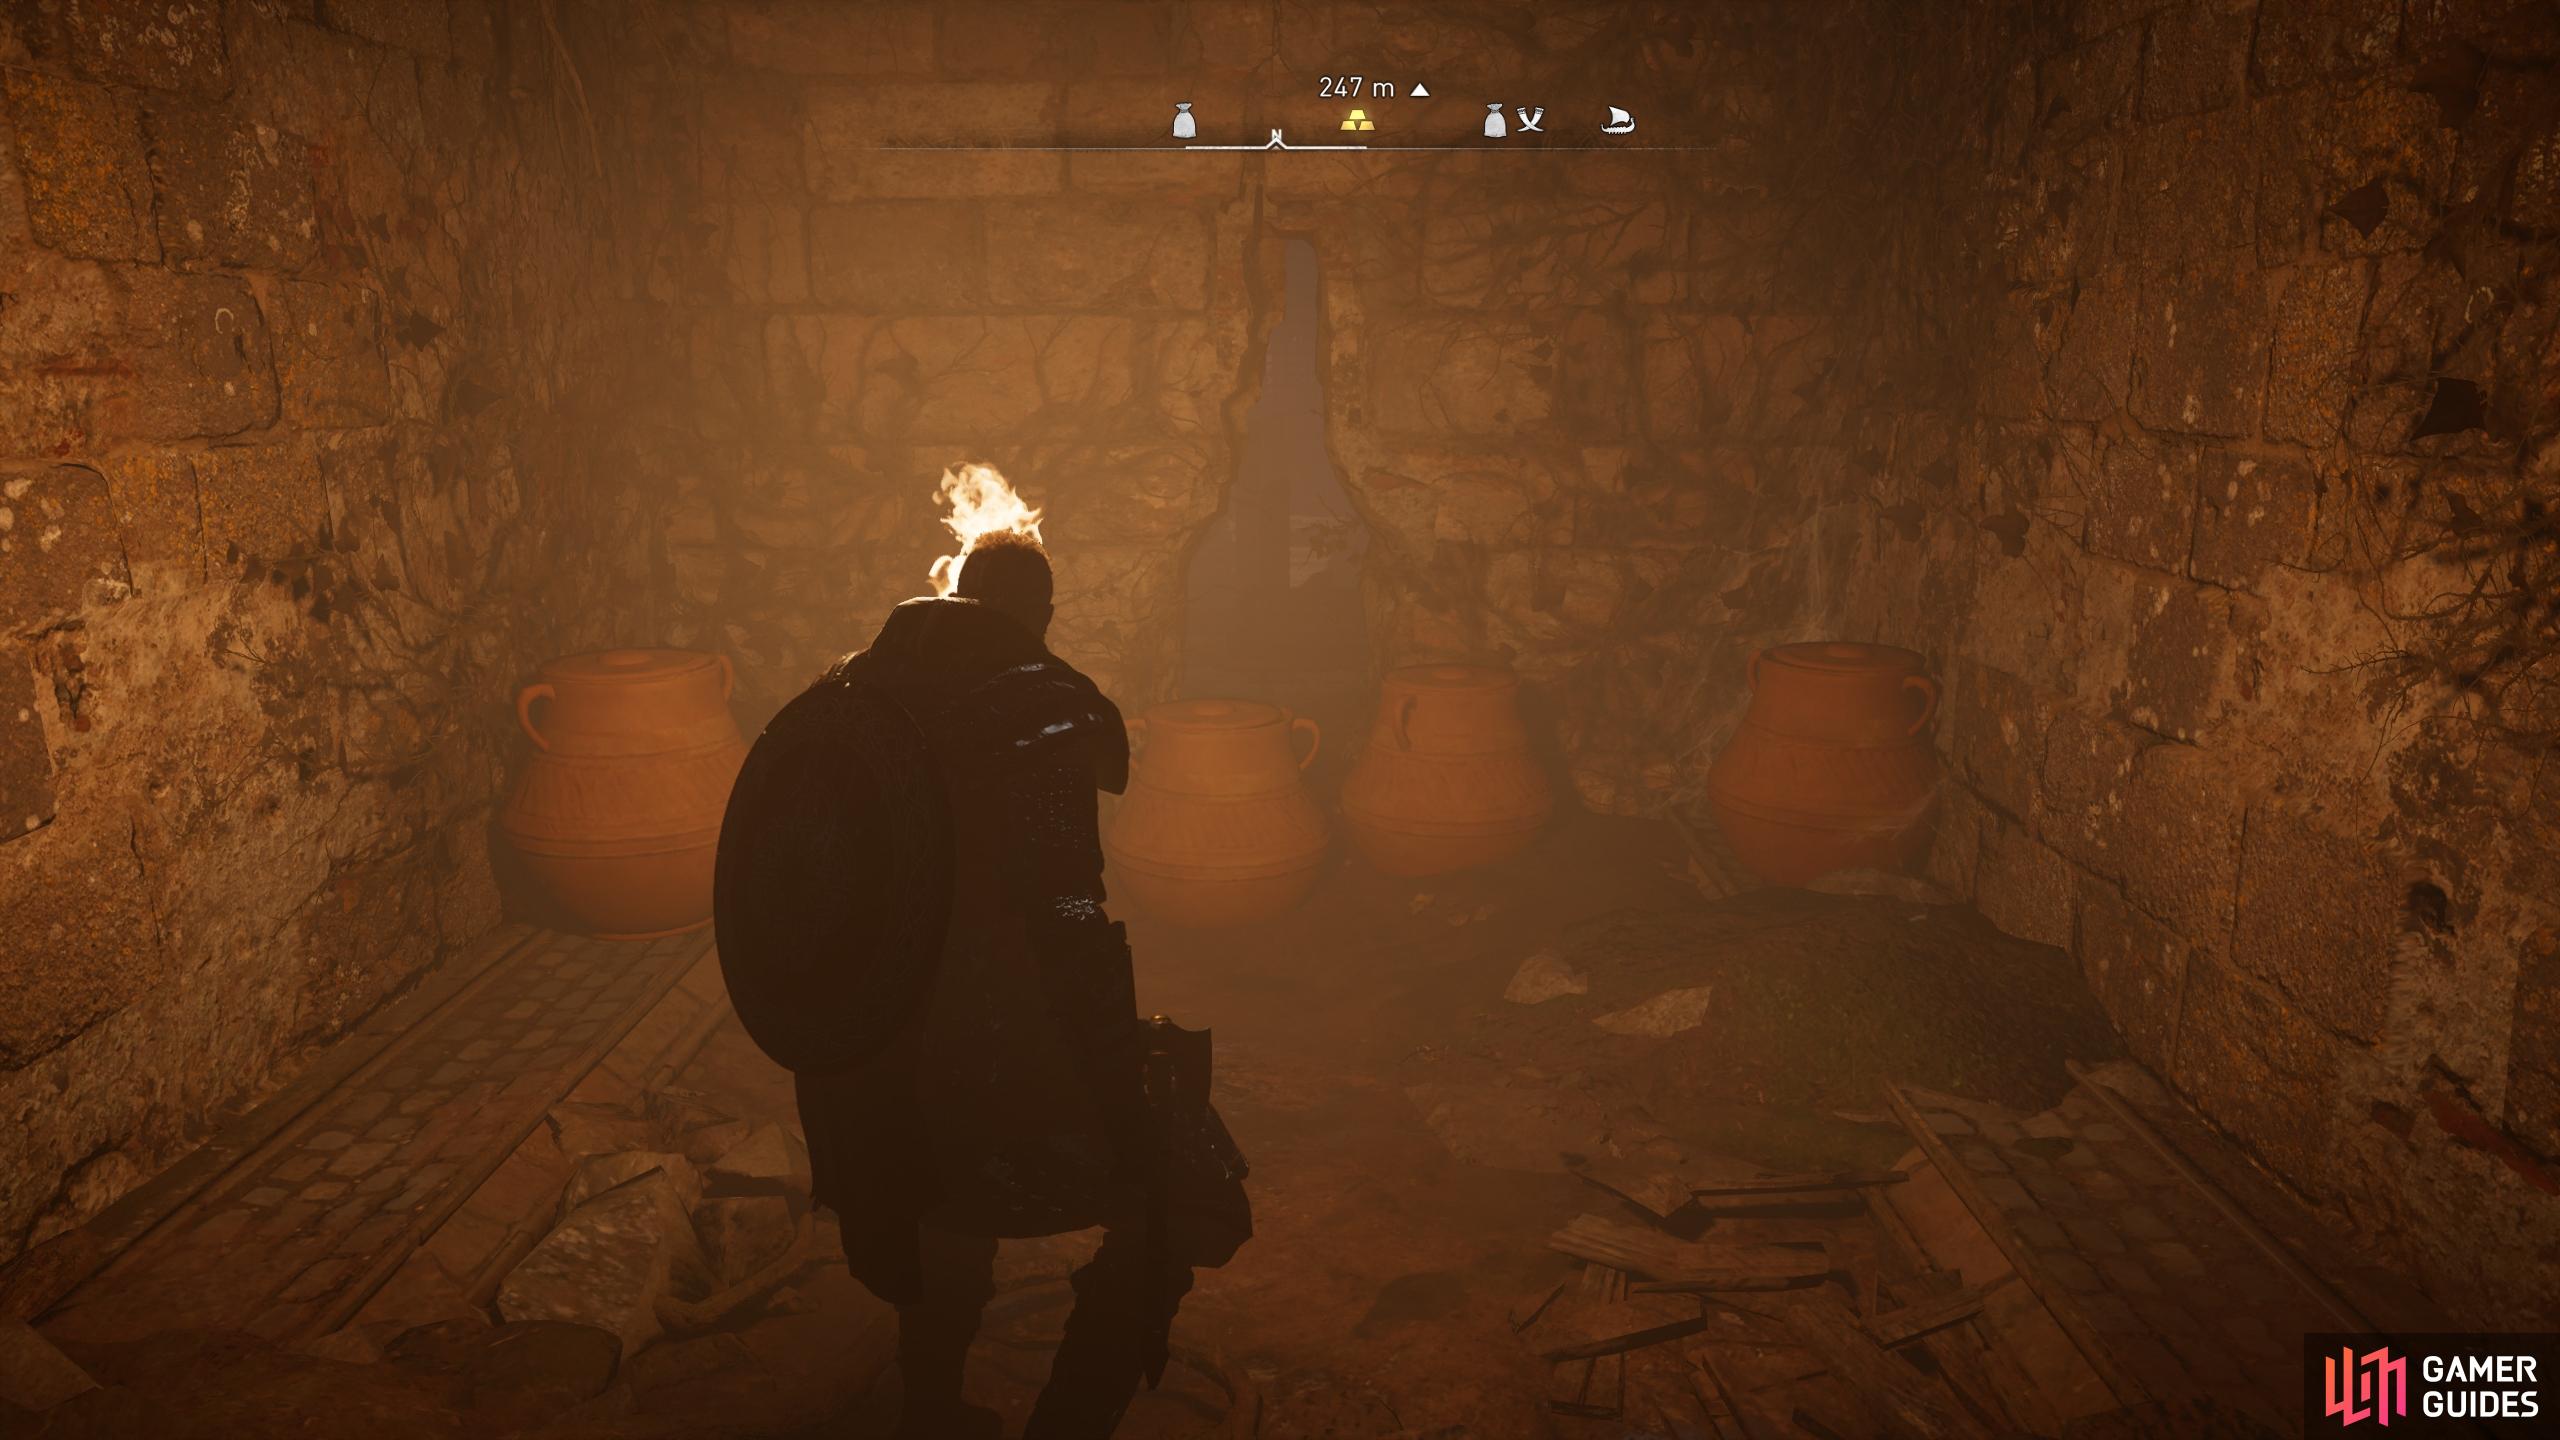 You'll emerge form the water in front of a crack in the wall. Destroy the pots to proceed.